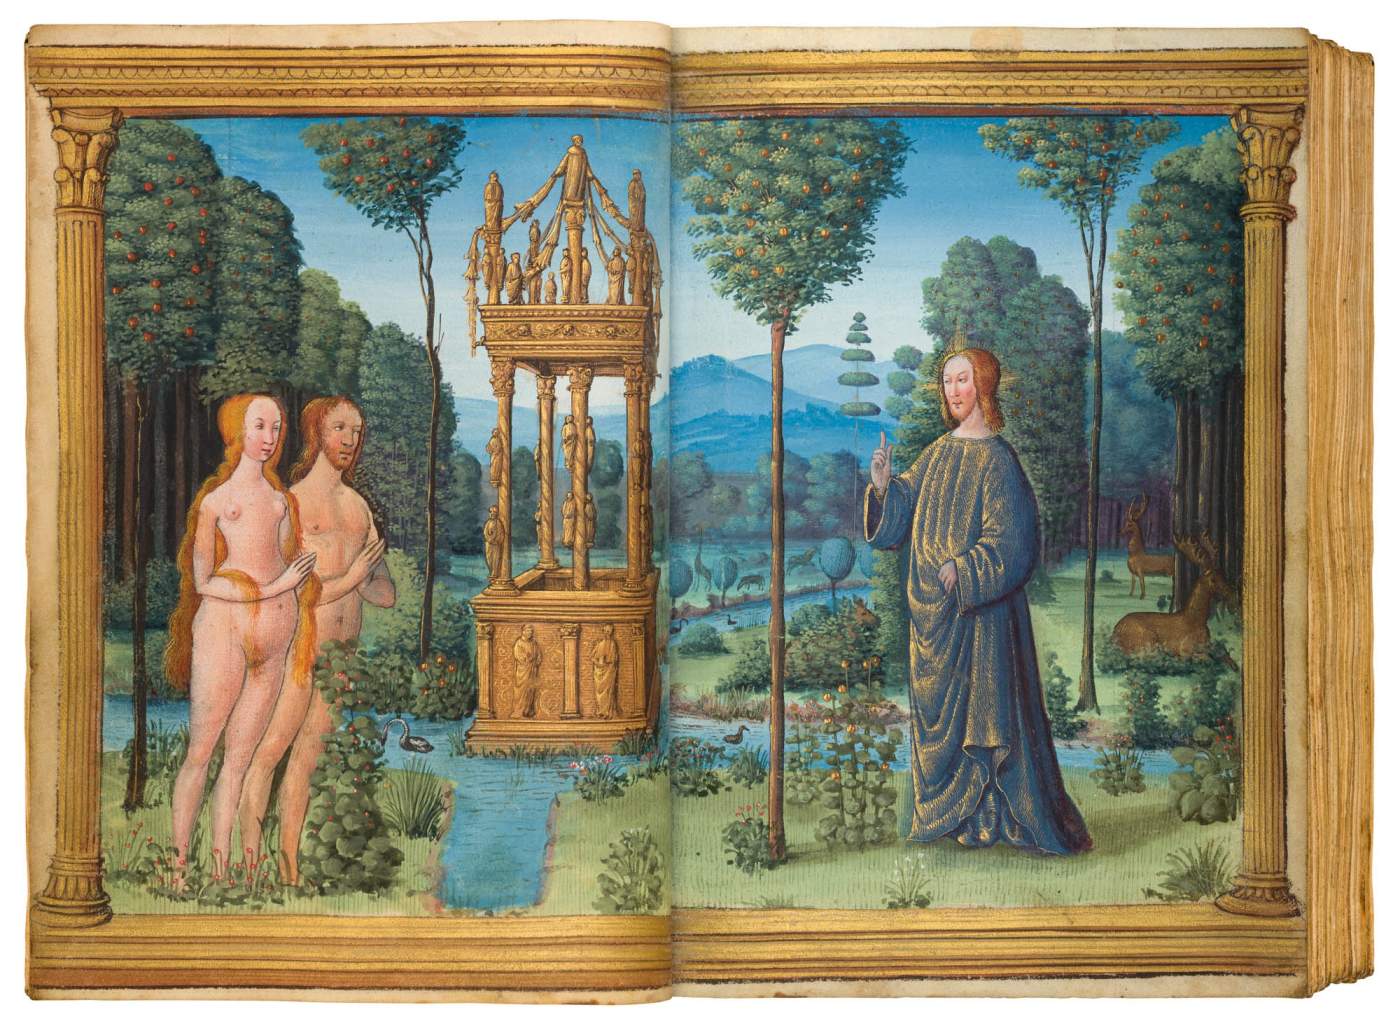 Discovering Unmatched Beauty: The G&H Book of Hours